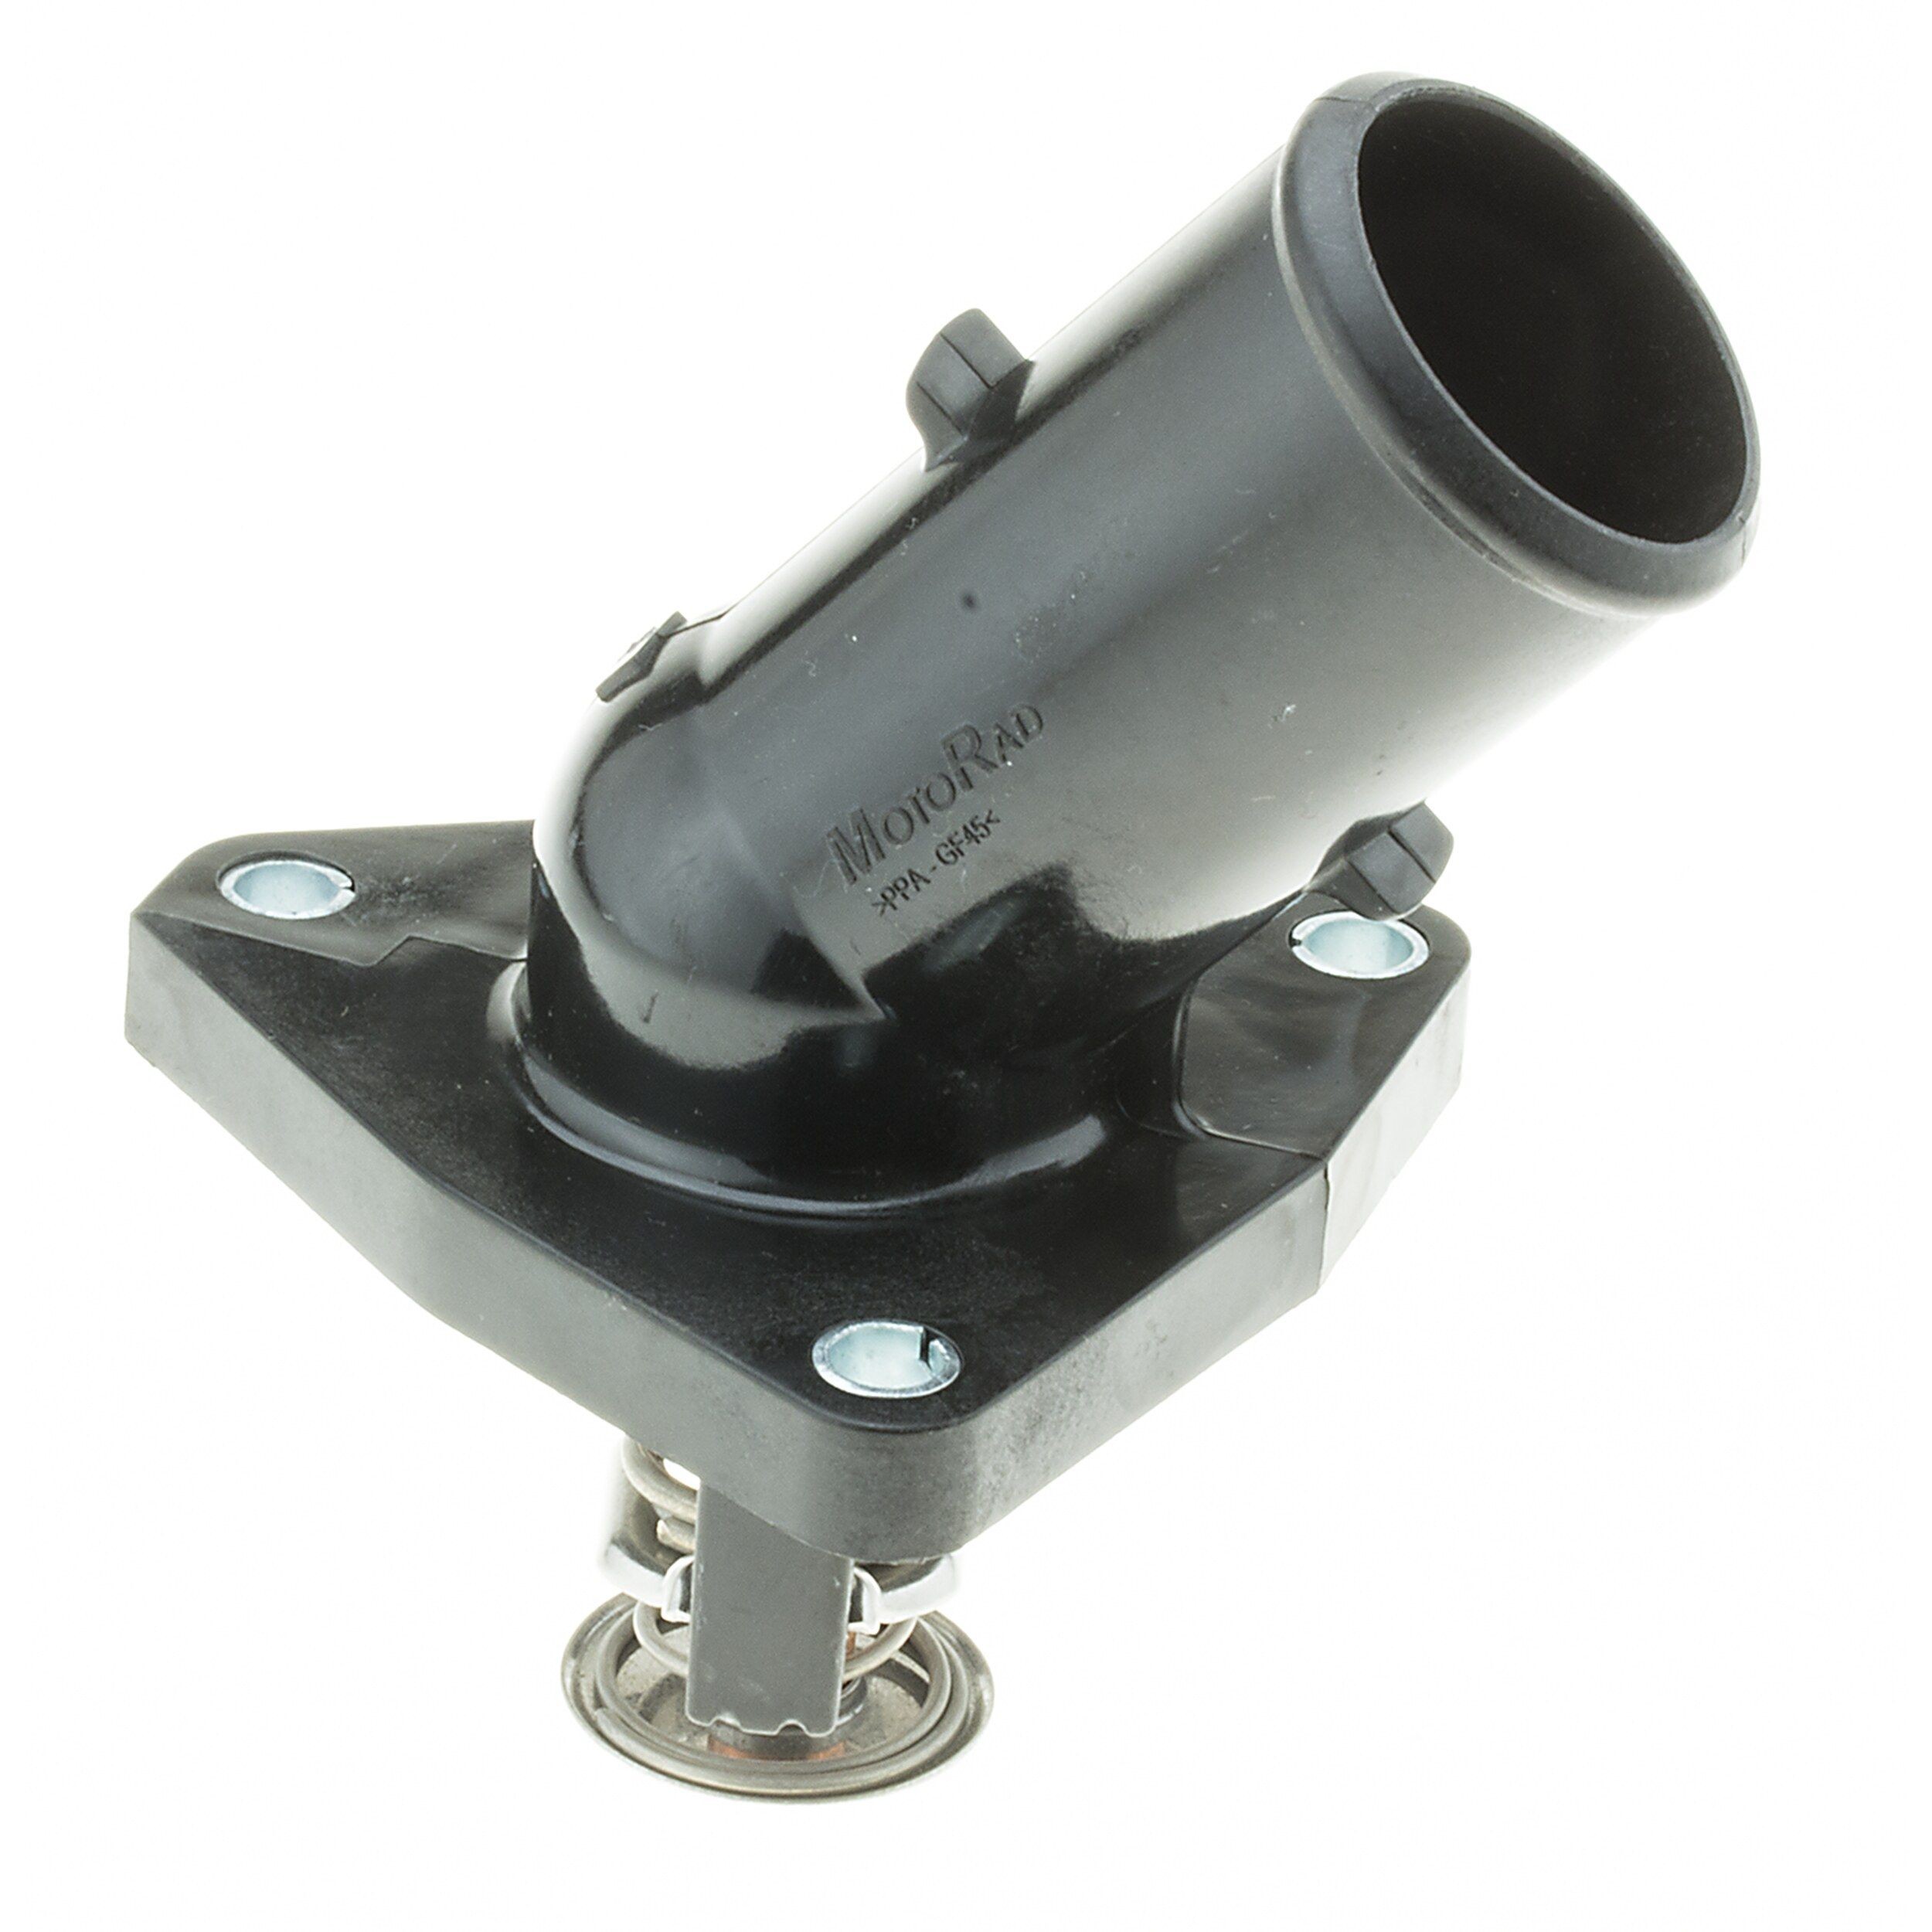 MOTORAD 660-82K Engine thermostat Opening Temperature: 82°C, with housing